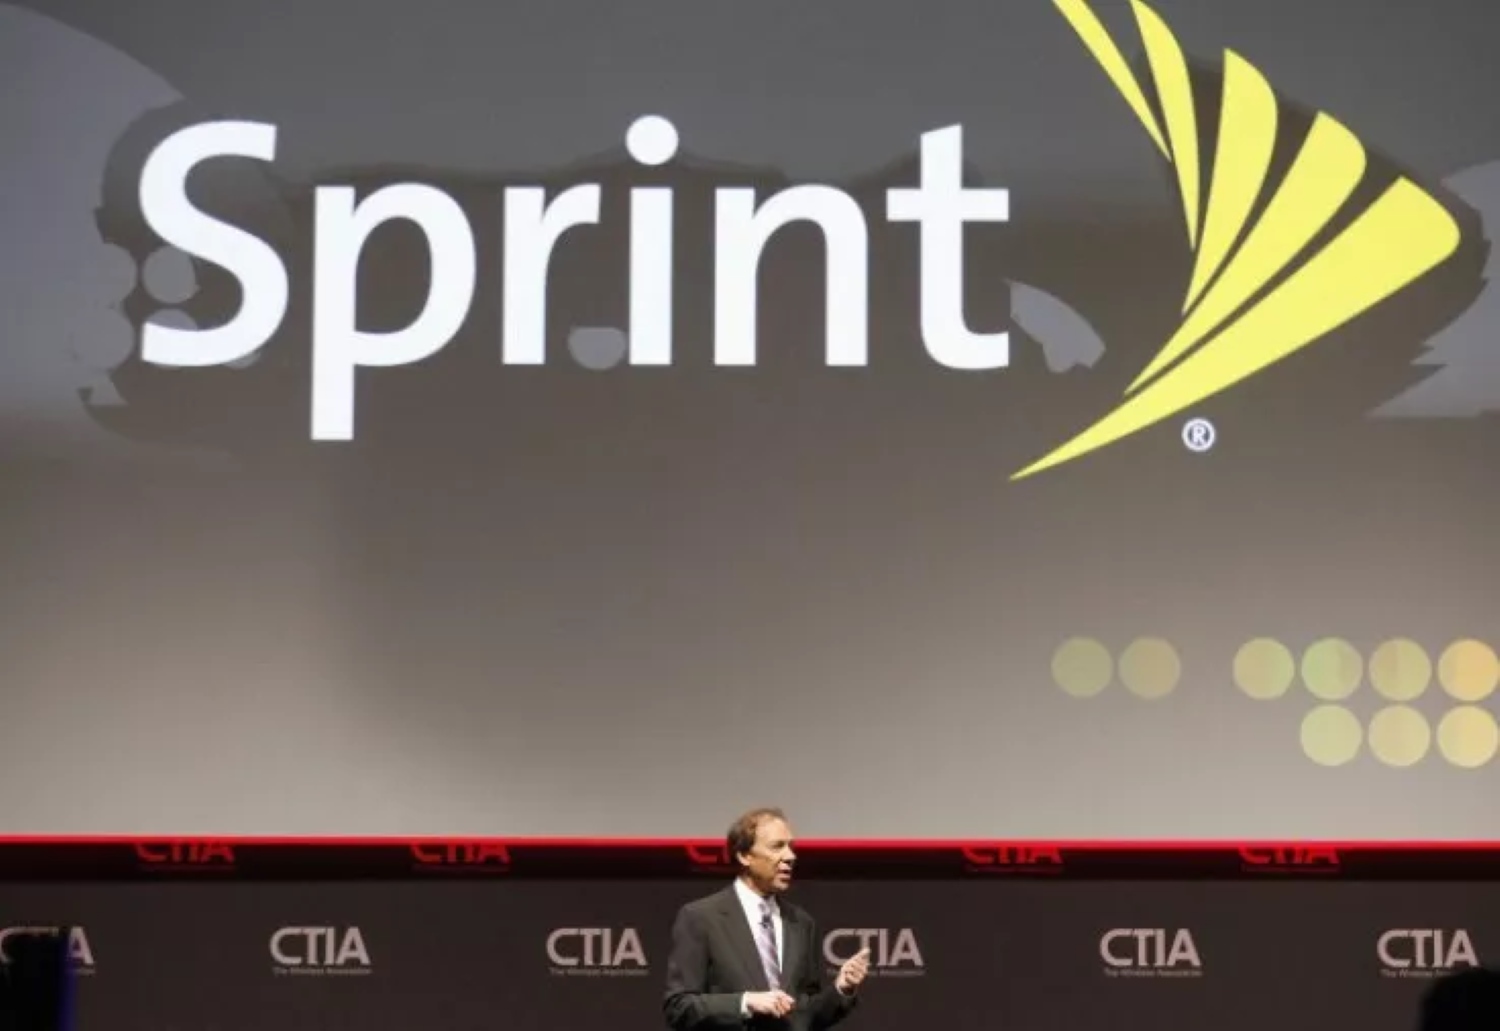 Sprint executive in a conference